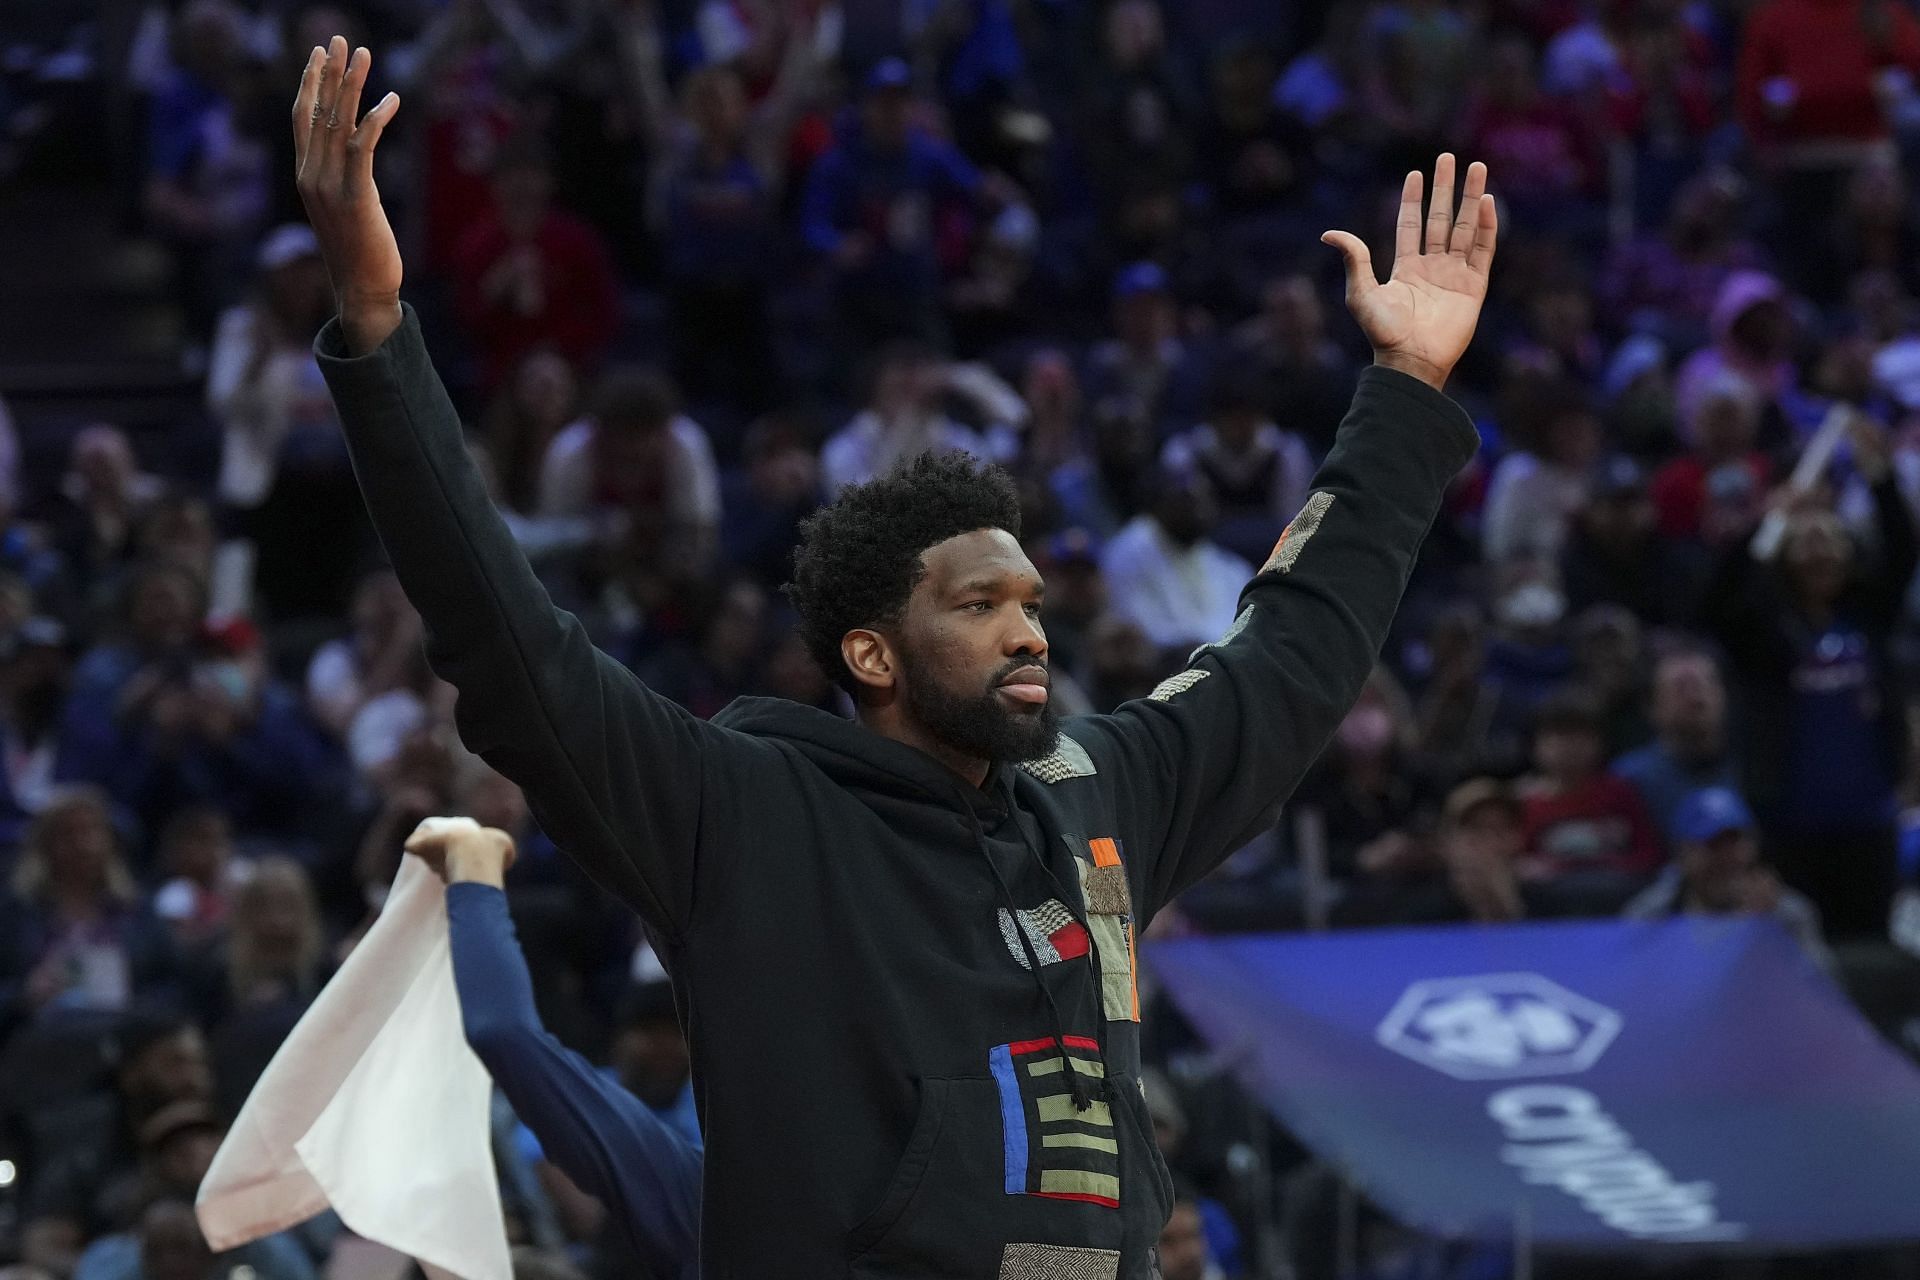 Joel Embiid will be hoping to lead the Philadelphia 76ers to a deep playoff run.